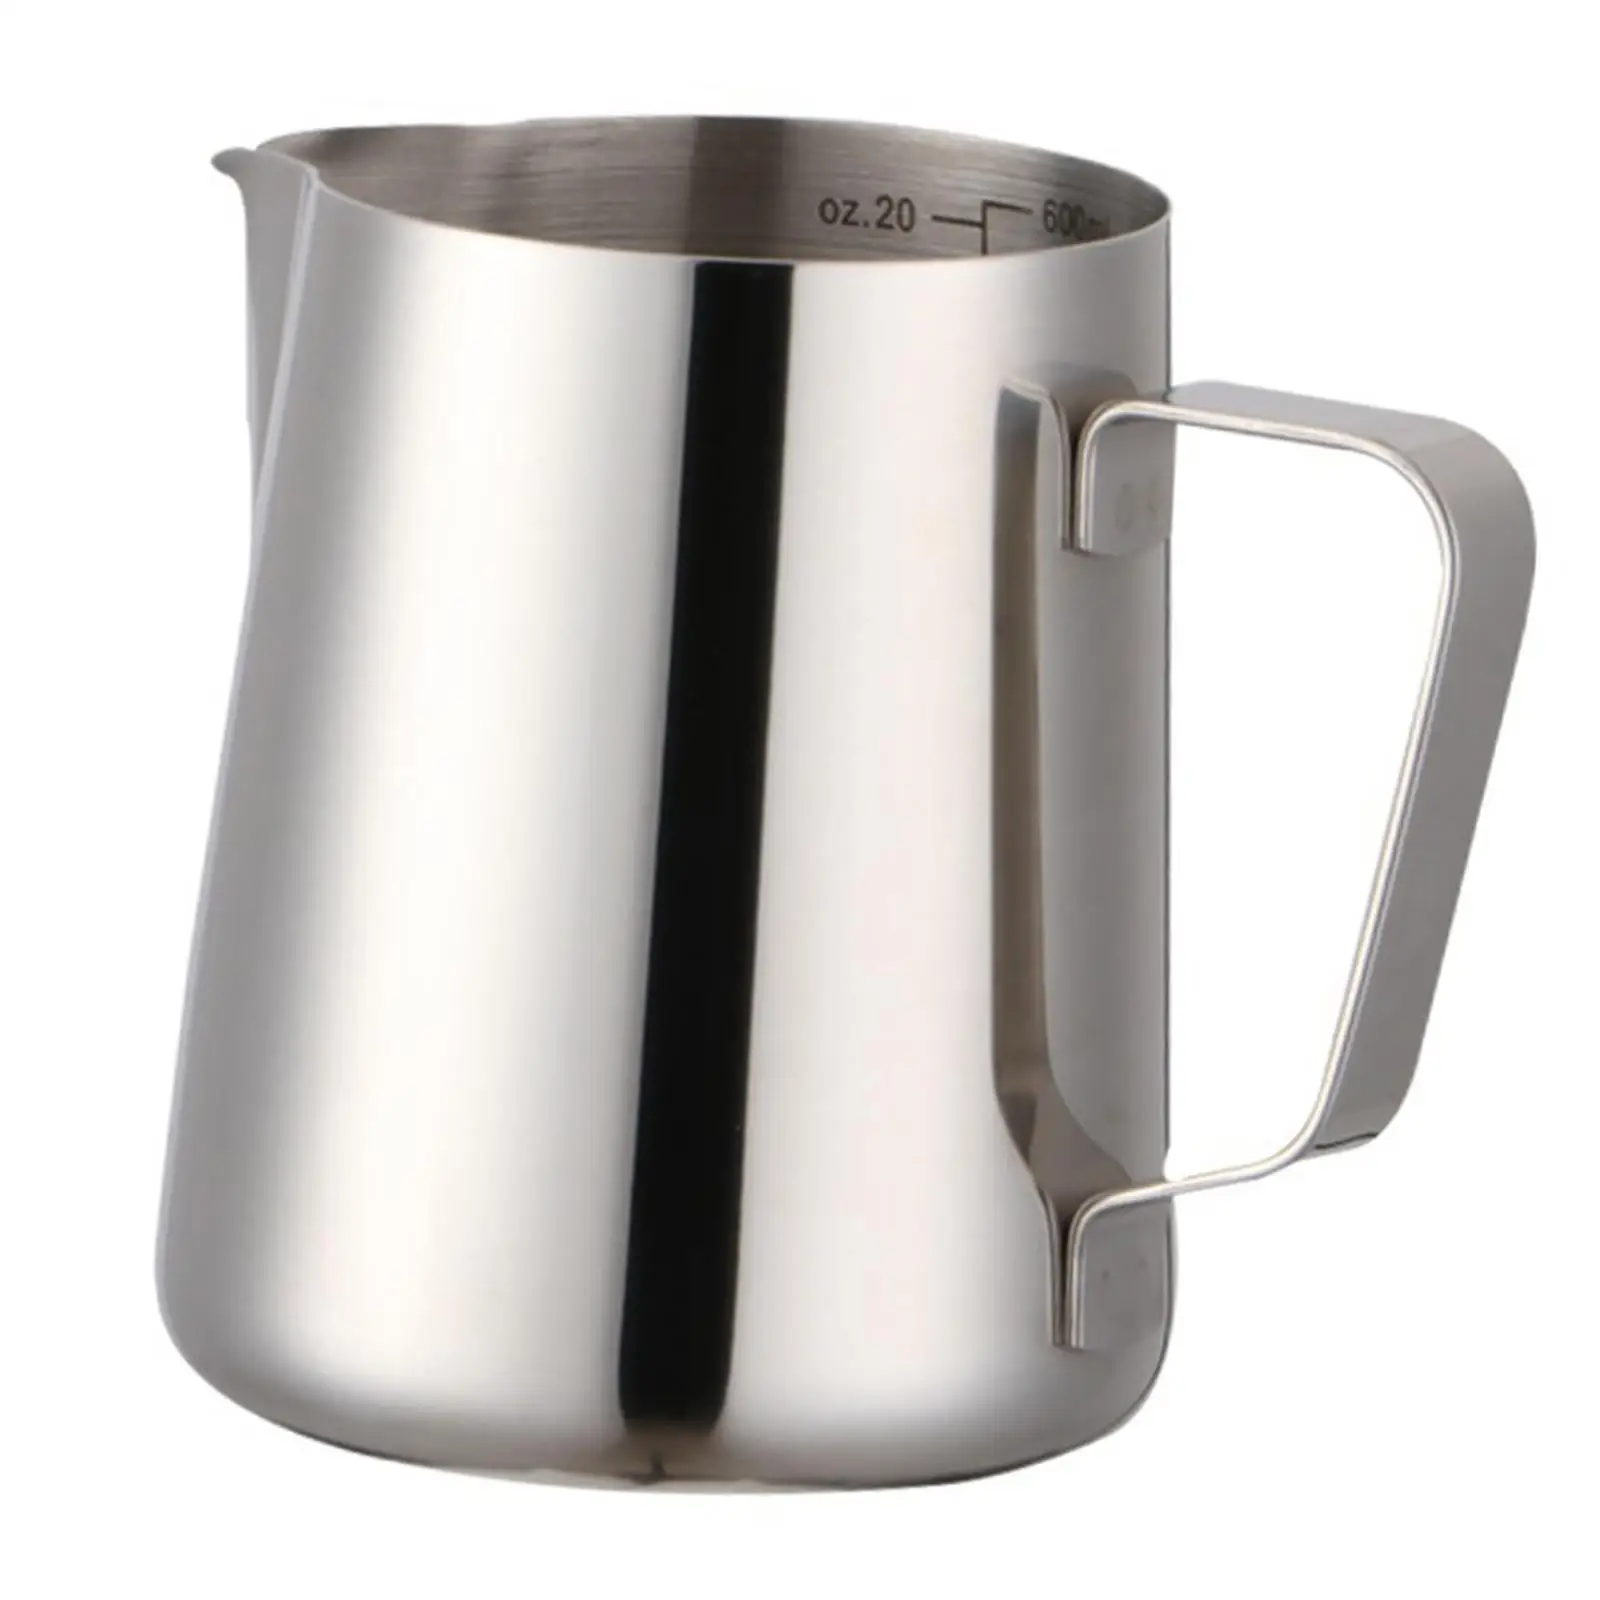 600ml Milk Frothing Pitcher Milk Frother cup Jug Cup Espresso Machine Accessories Espresso Steaming Pitcher for coffee